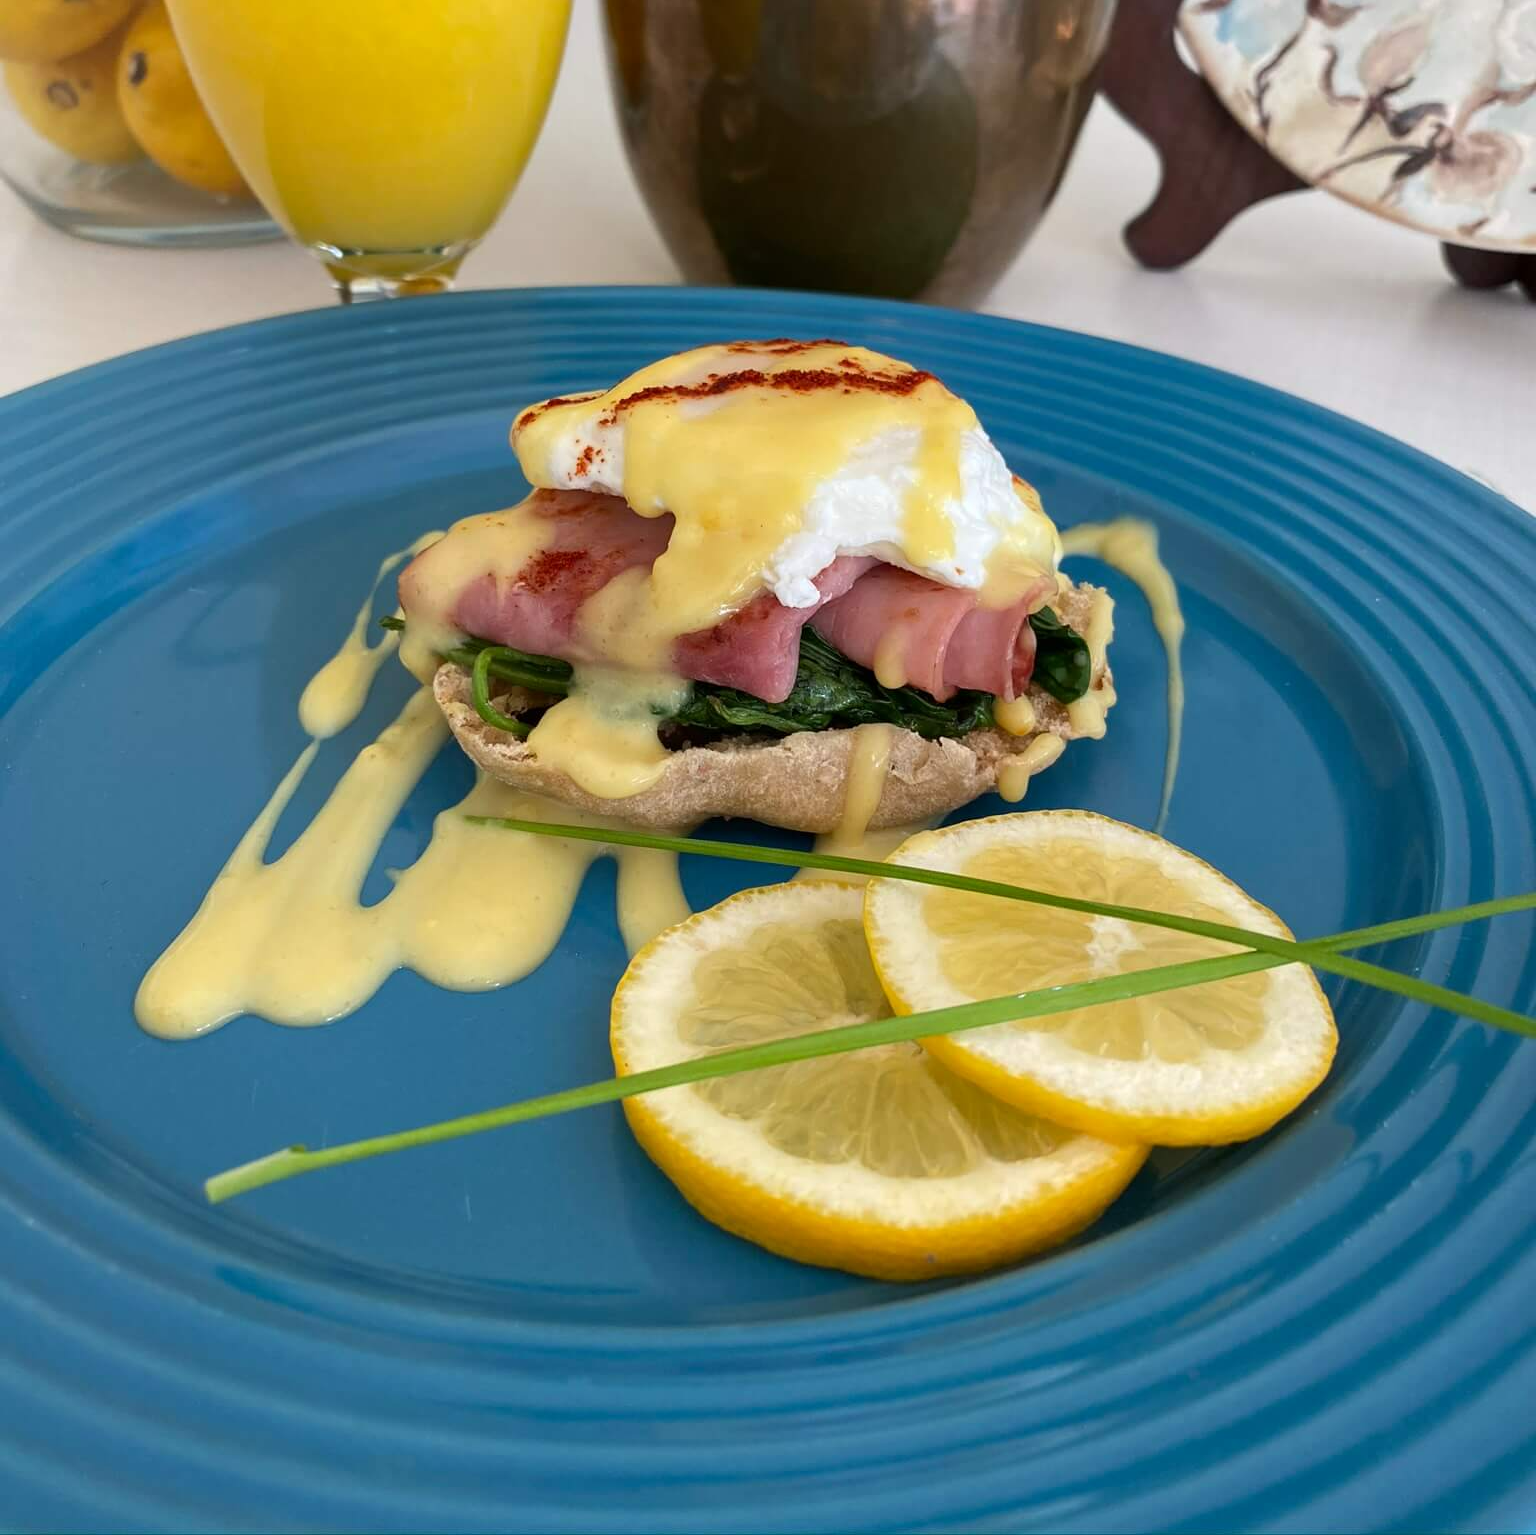 eggs benedict displayed on bright blue plate